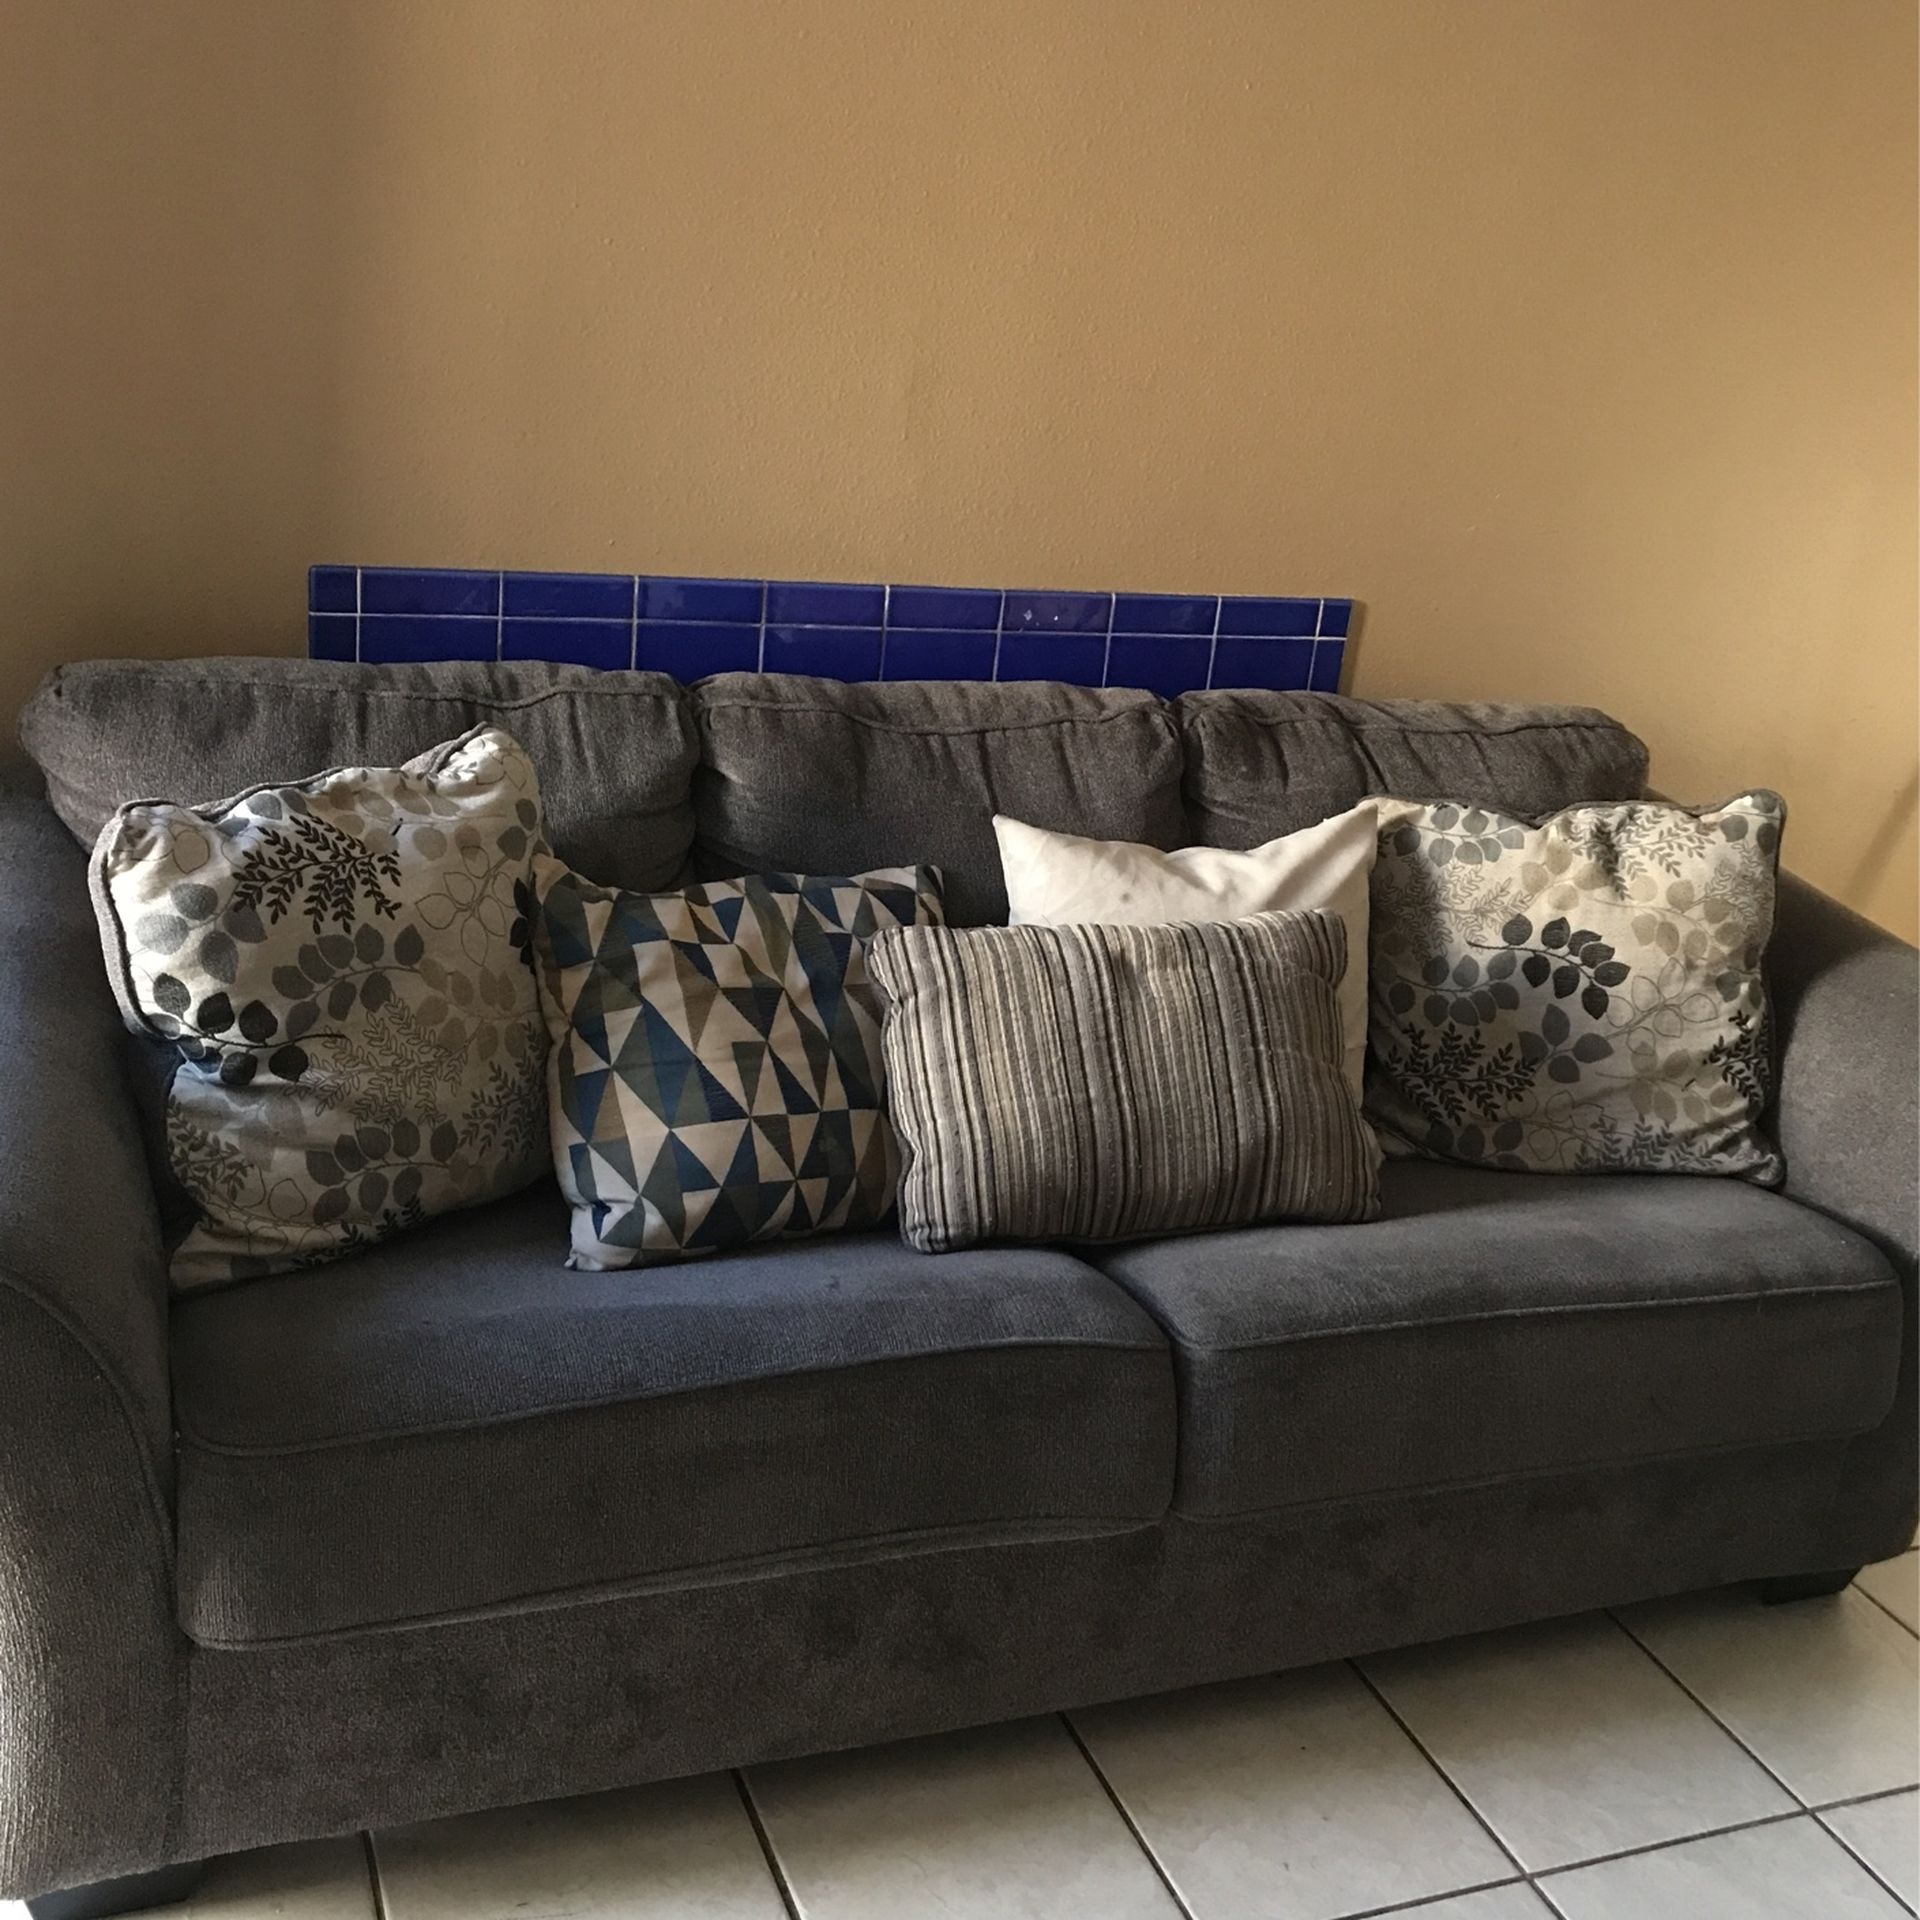 Sofa Bed For Sale!!